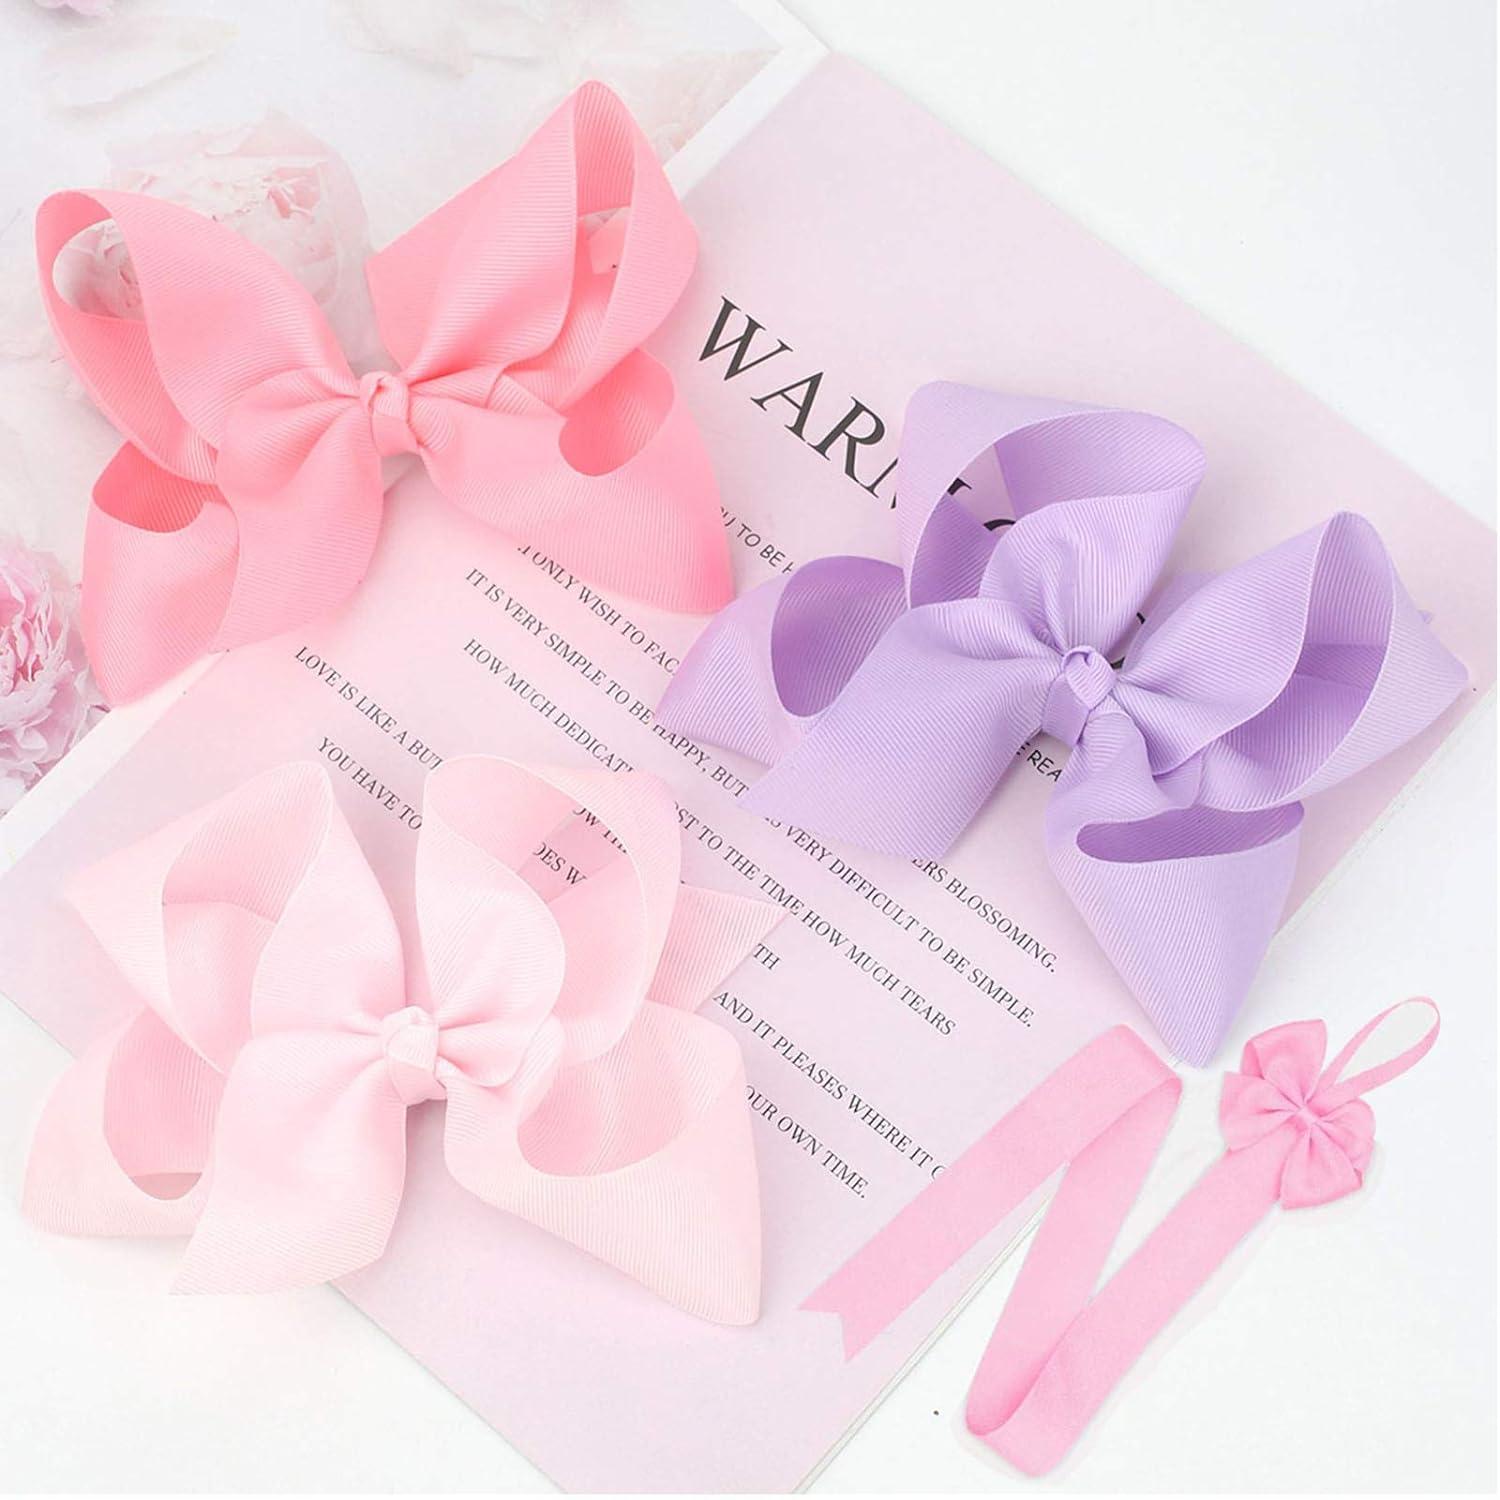 3/4/6/8inch Boutique Handmade Colorful Solid Ribbon Grosgrain Hair Bow With  Clips For Kids Girls Hair Accessories